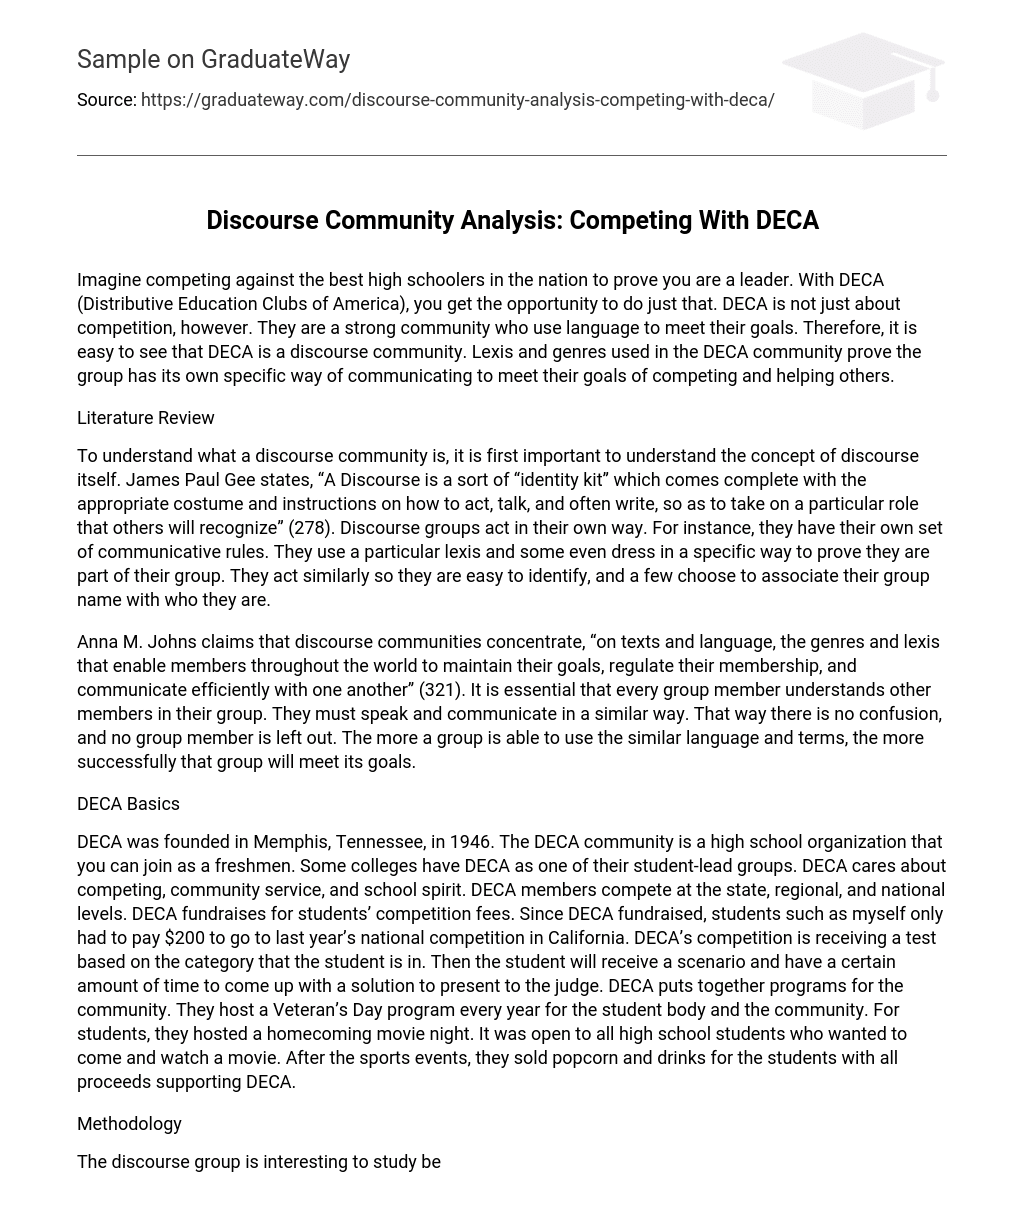 Discourse Community Analysis: Competing With DECA